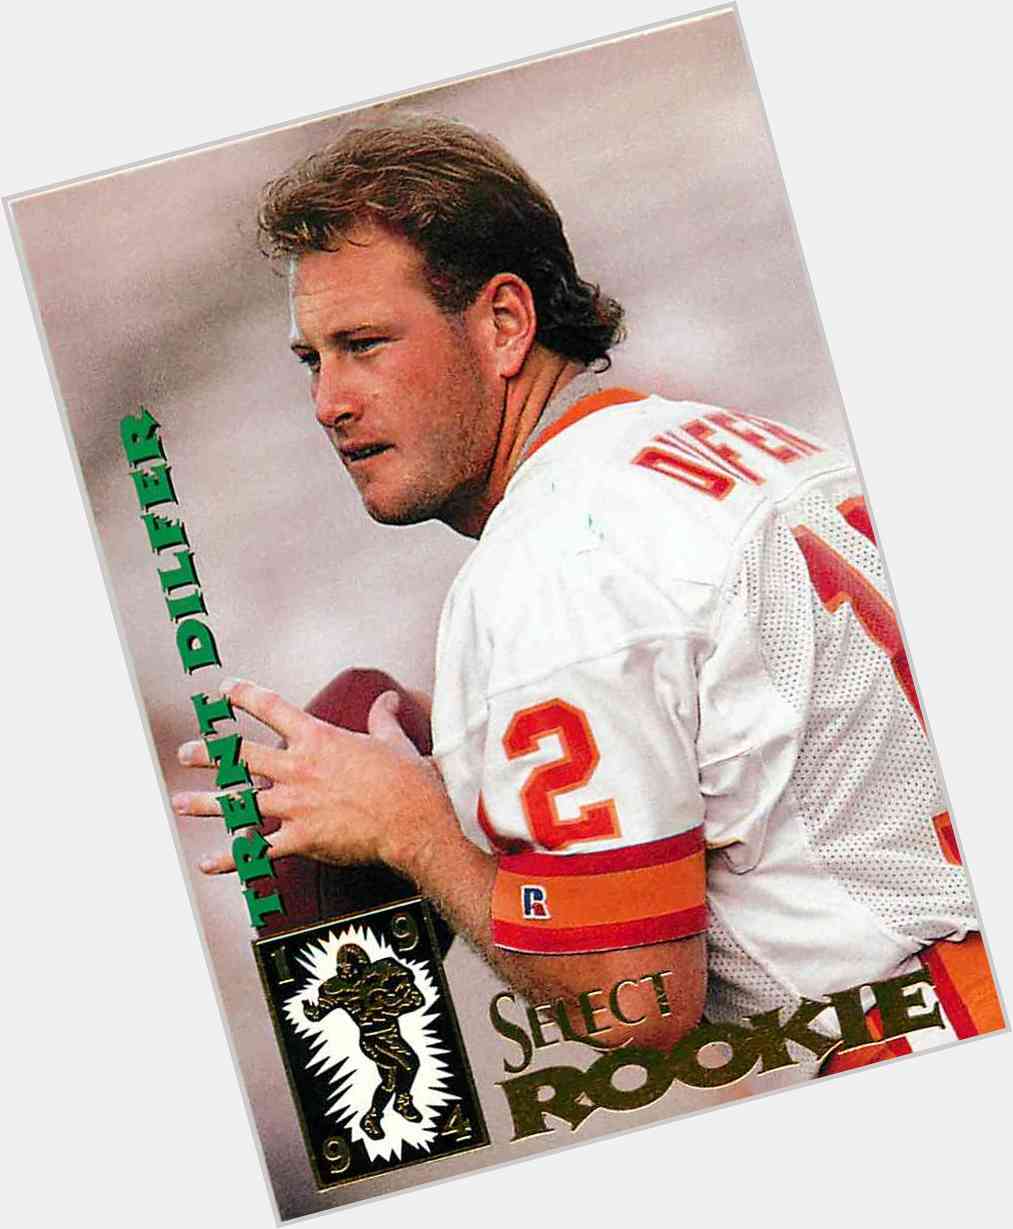 Happy Birthday Trent Dilfer (feat hair)!

Put down an athlete that had hair (but doesn t now)! 